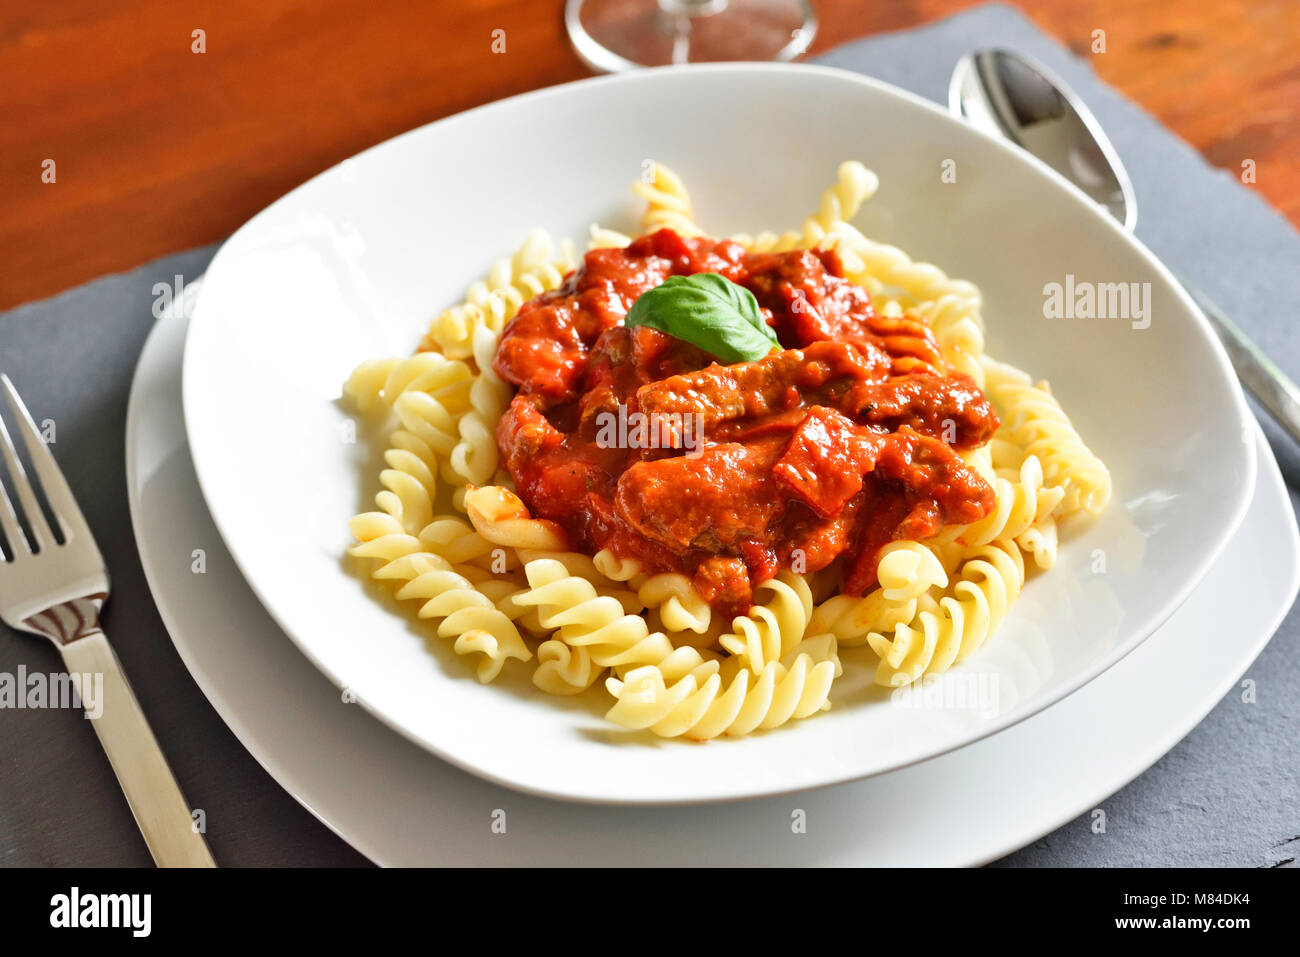 Delicious goulash dish on a white plate with basil leaf. Spiral pasta with tomato sauce. Stock Photo